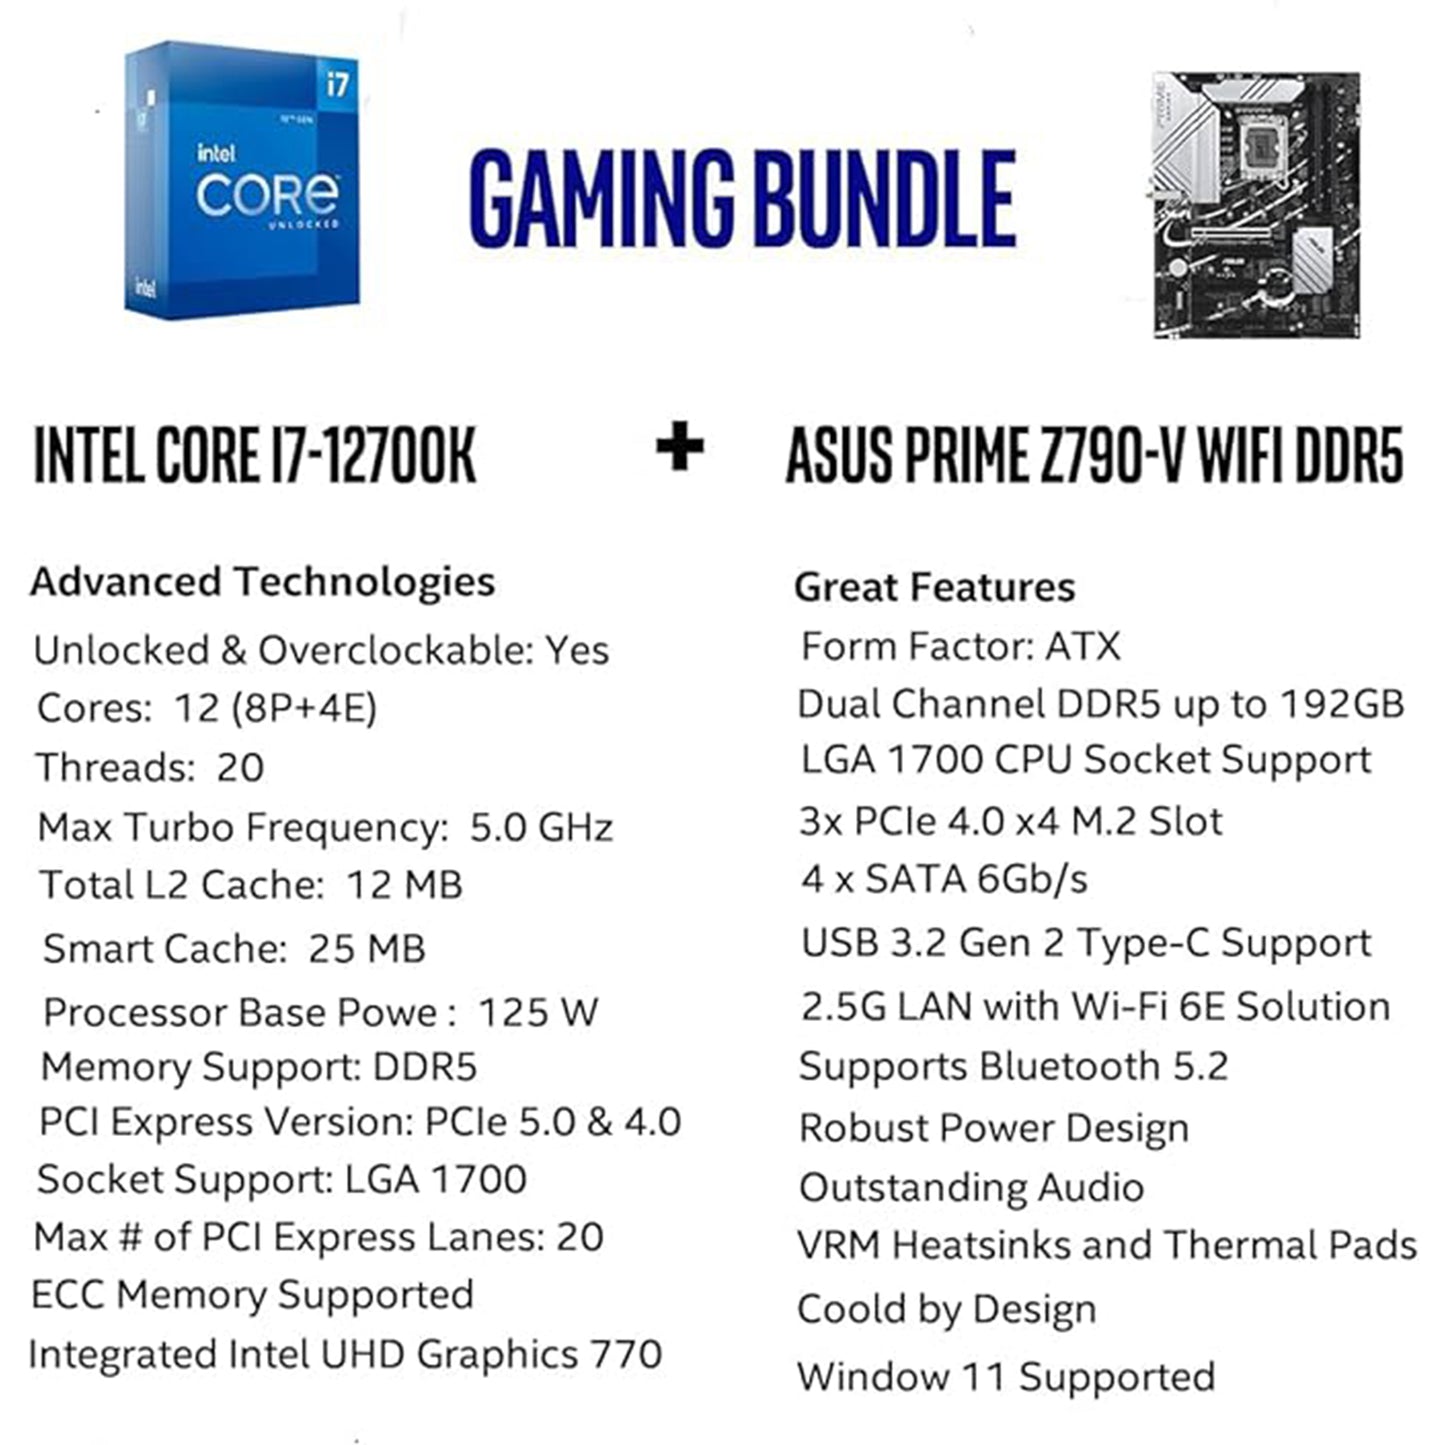 Micro Center Intel Core i7-12700K 12 (8P+4E) Cores up to 5.0 GHz Unlocked Desktop Processor with Integrated Intel UHD Graphics 770 Bundle with ASUS Prime Z790-P WiFi DDR5 ATX Gaming Motherboard